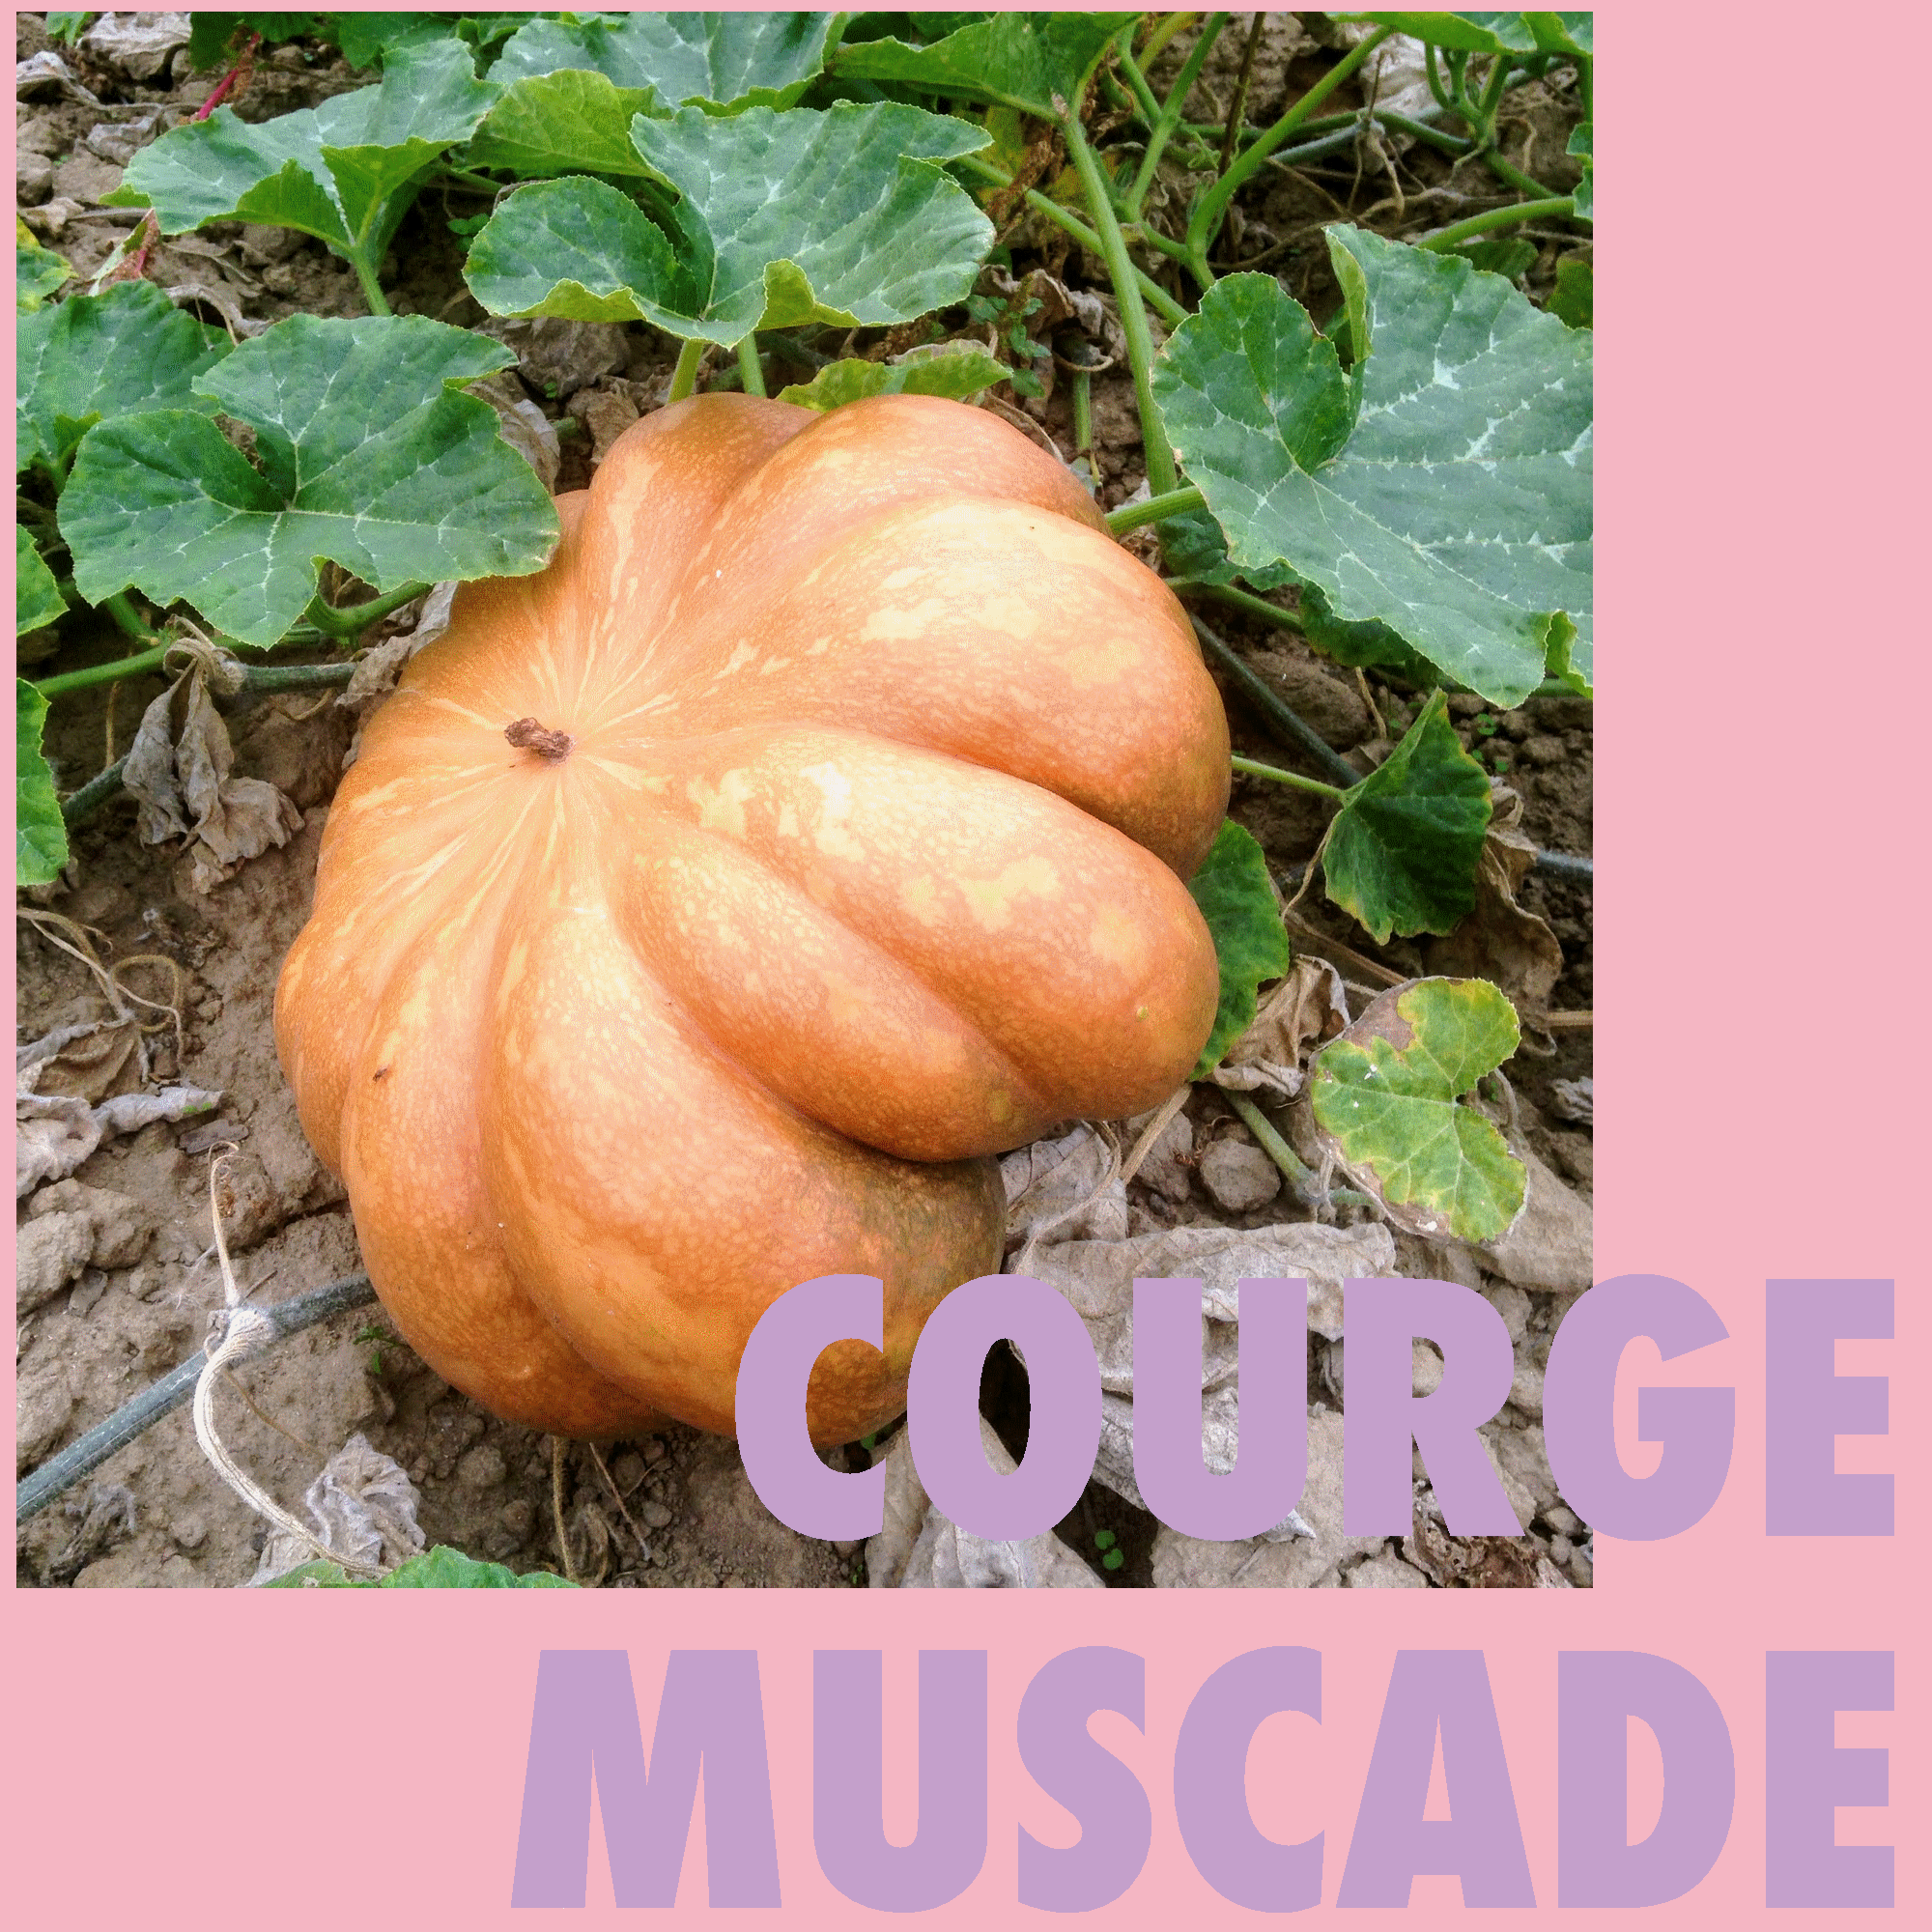 Courge muscade